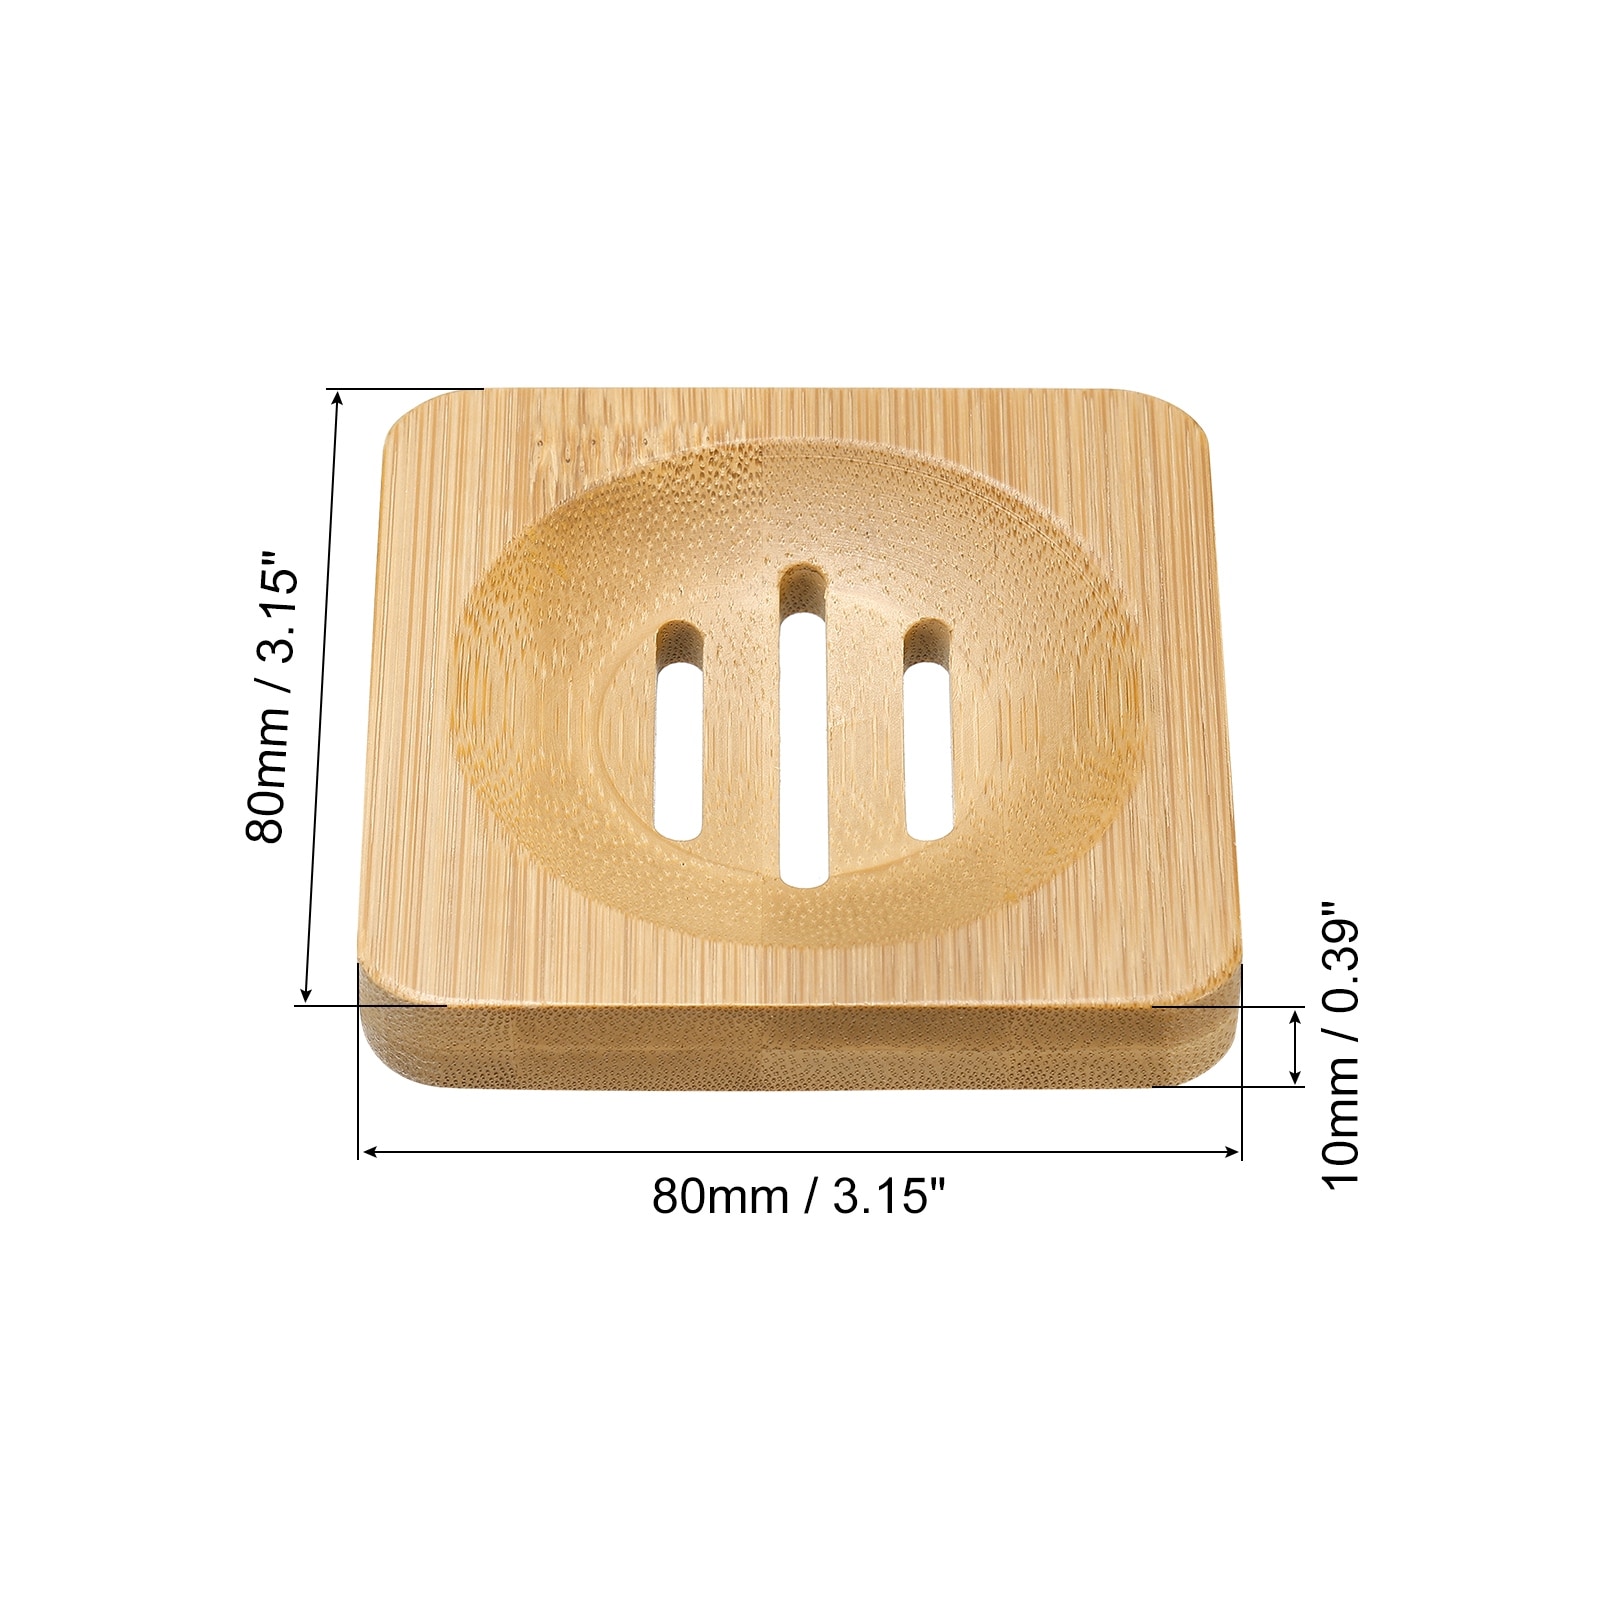 https://ak1.ostkcdn.com/images/products/is/images/direct/9dfcd386b7688f740c9c2cb3d796ed5cd95736e7/Wooden-Soap-Dish%2C-2Pack-Natural-Bamboo-Soap-Tray-Soap-Saver.jpg